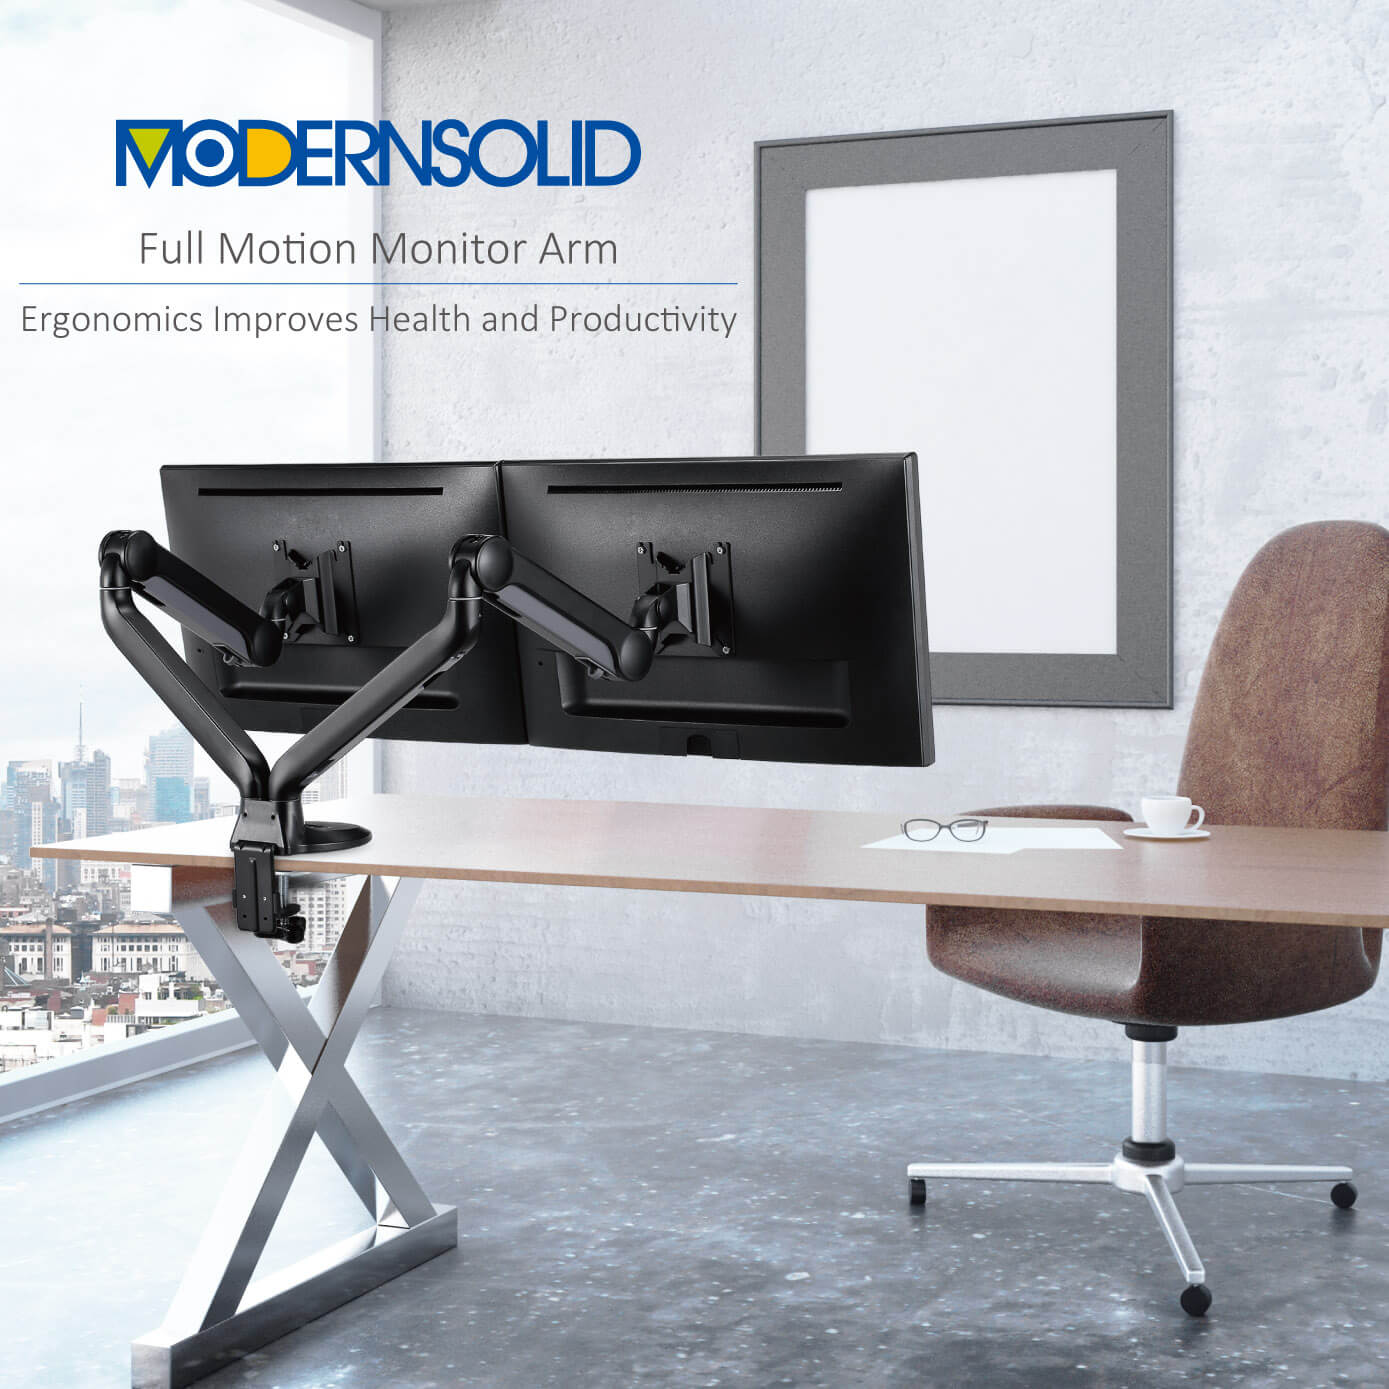 Full Motion 1802 Dual Monitor Gas Spring Mount Arm Manufacturer -  Modernsolid